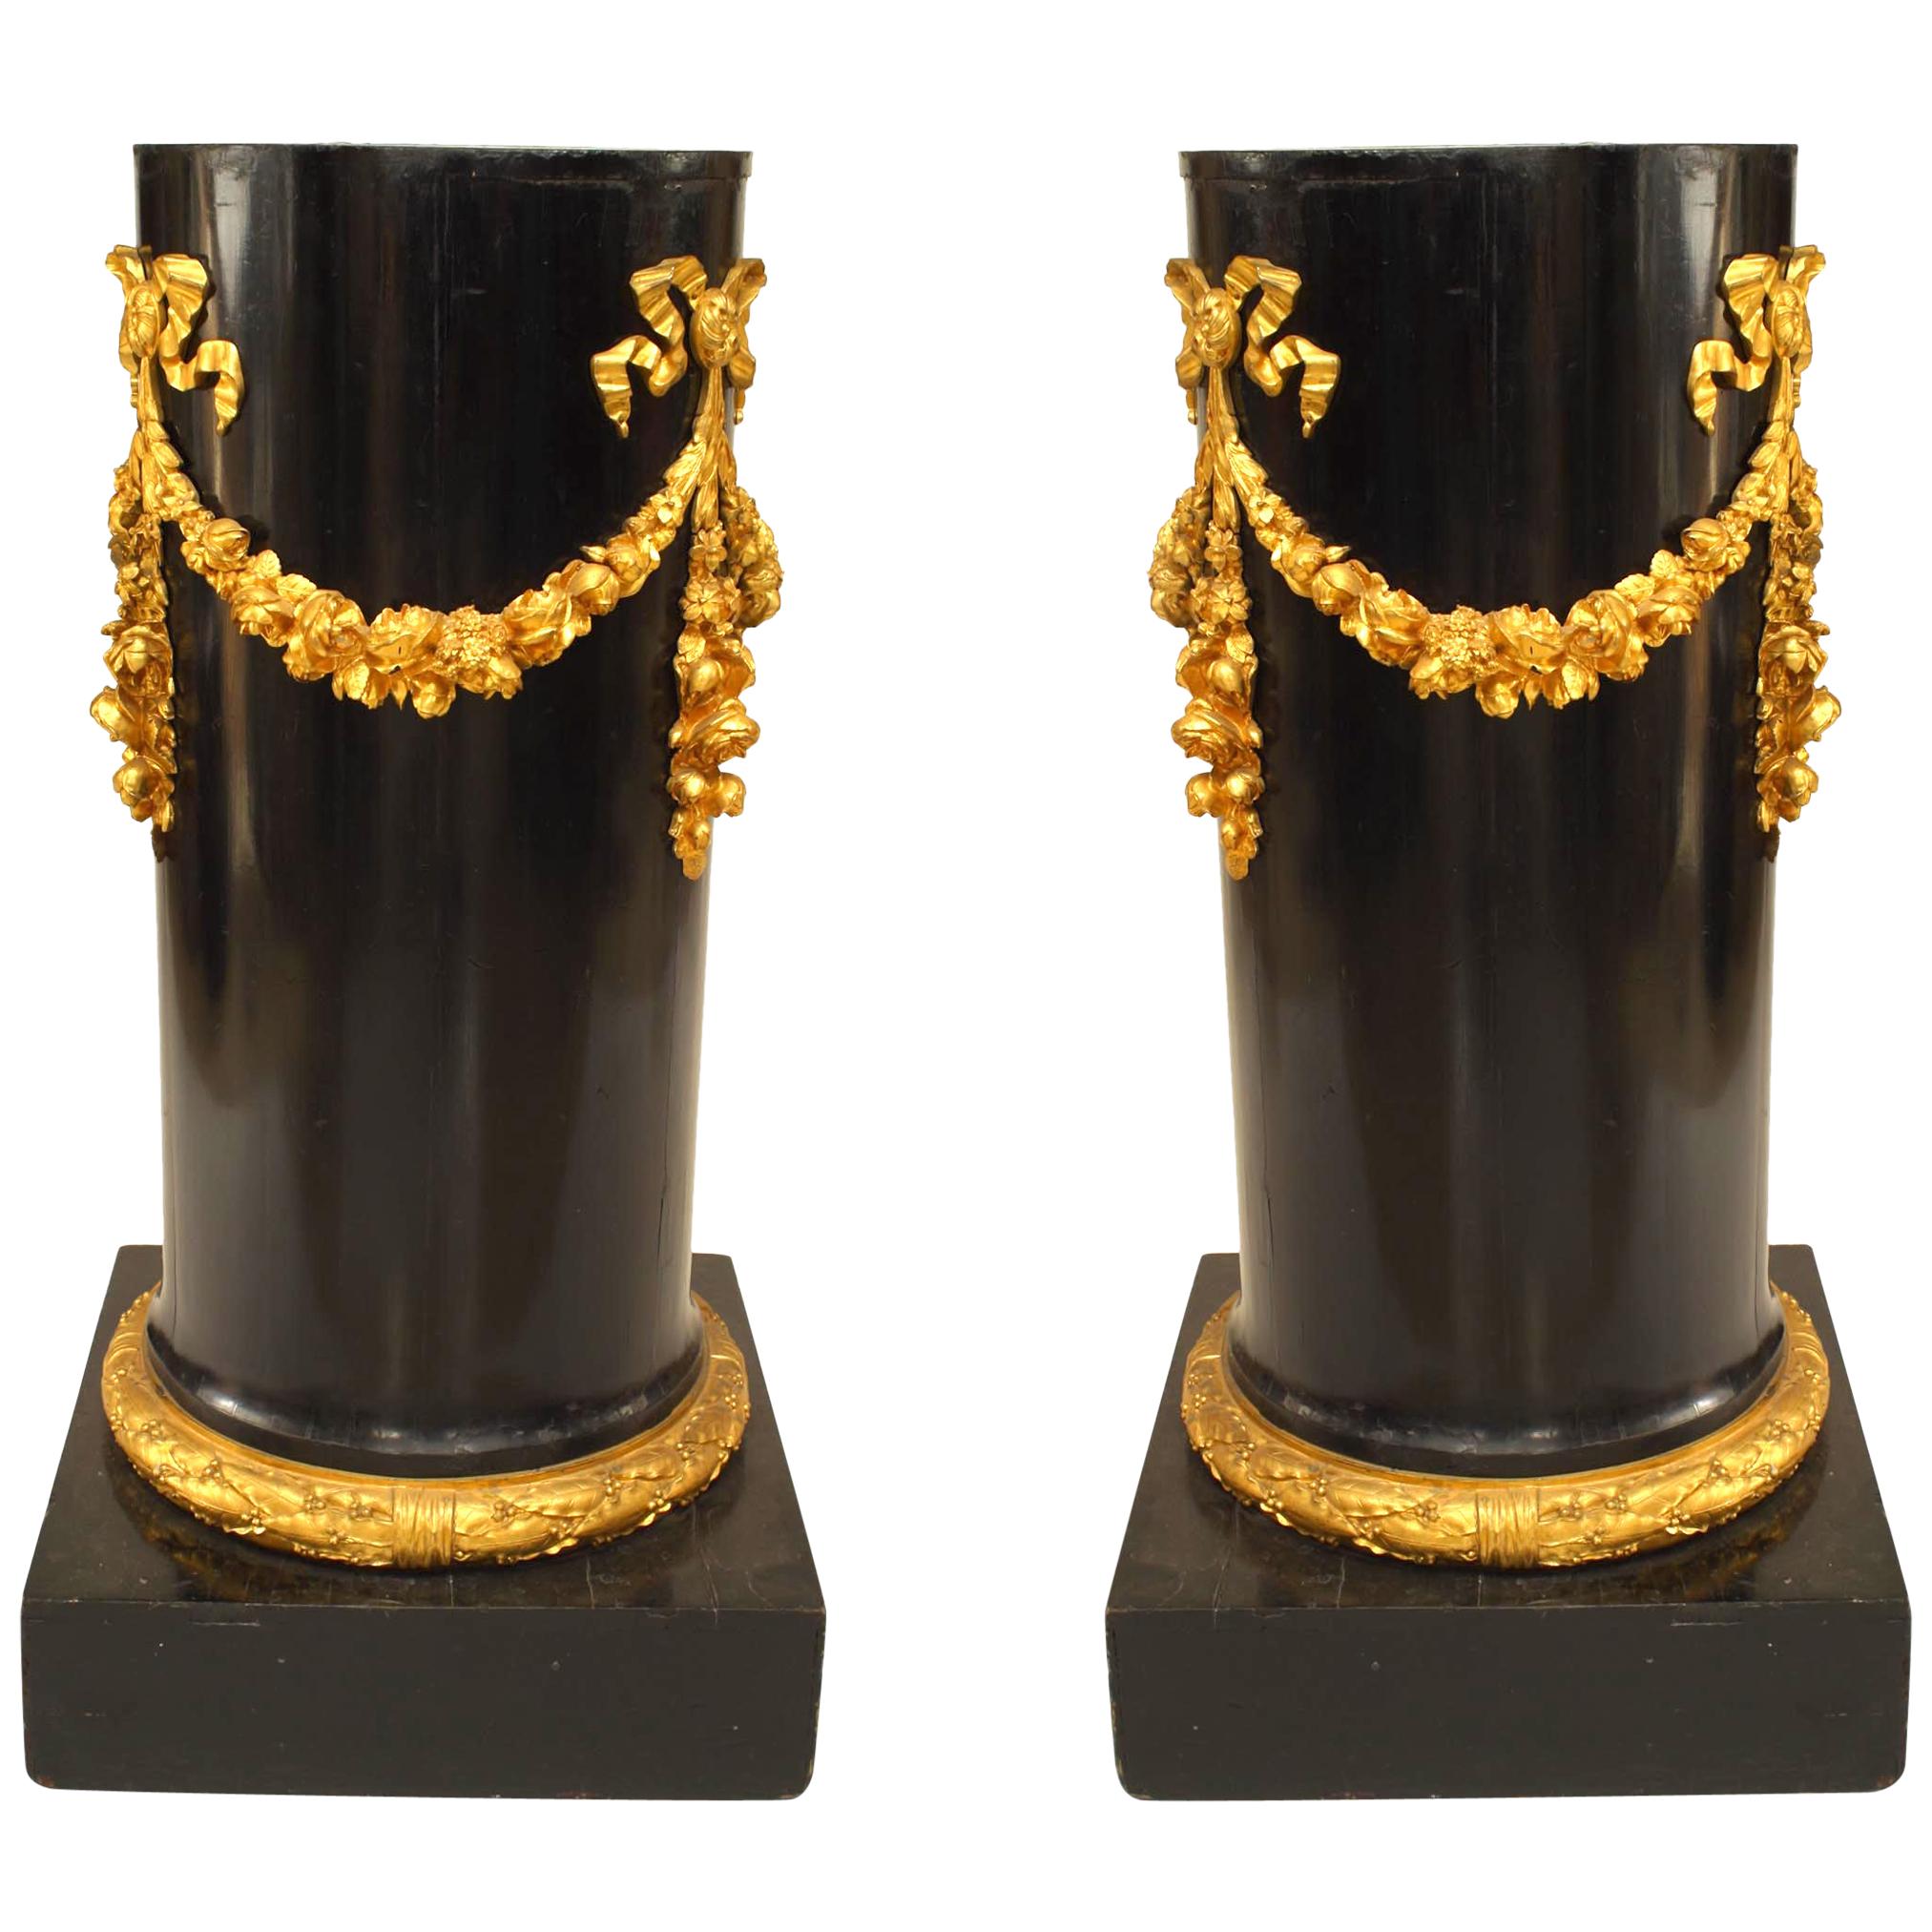 Pair of French Empire Black Lacquer Pedestals